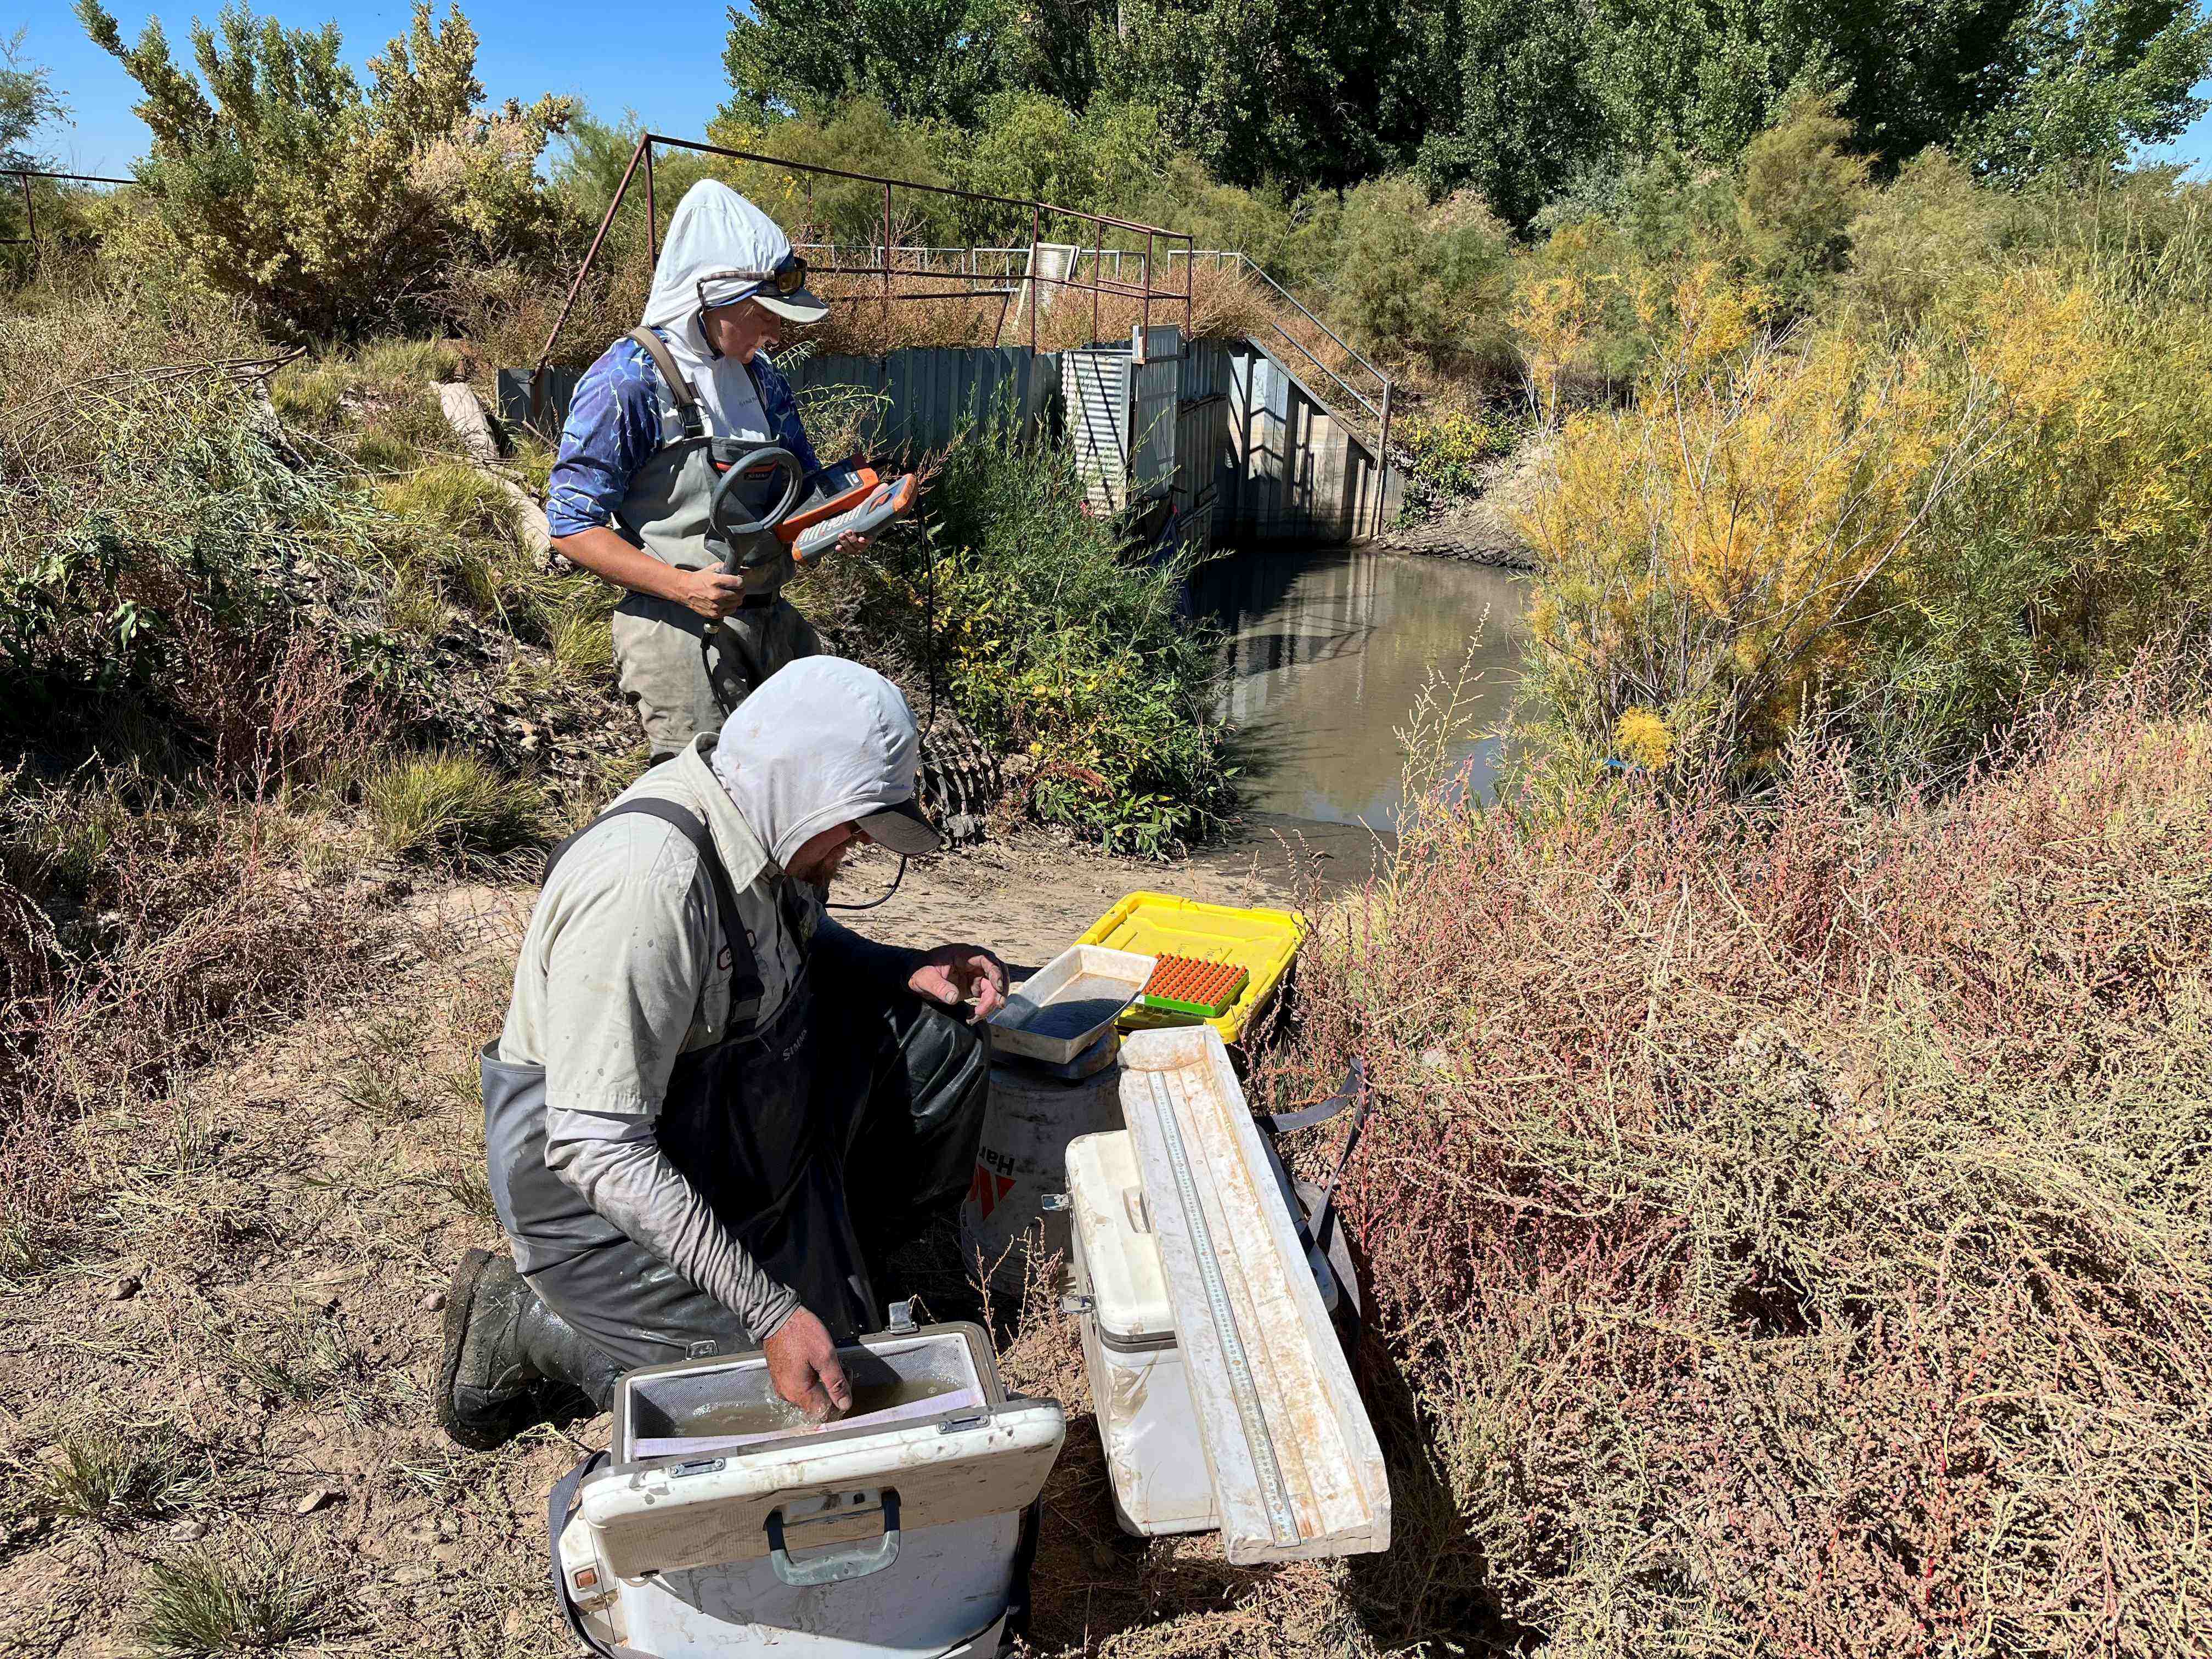 "Biologists weighing, measuring and tagging endanged fish pulled from the decades-old Old Charley water control structure, Ouray National Wildlife Refuge, Utah." - Reclamation photo by David Speas. 